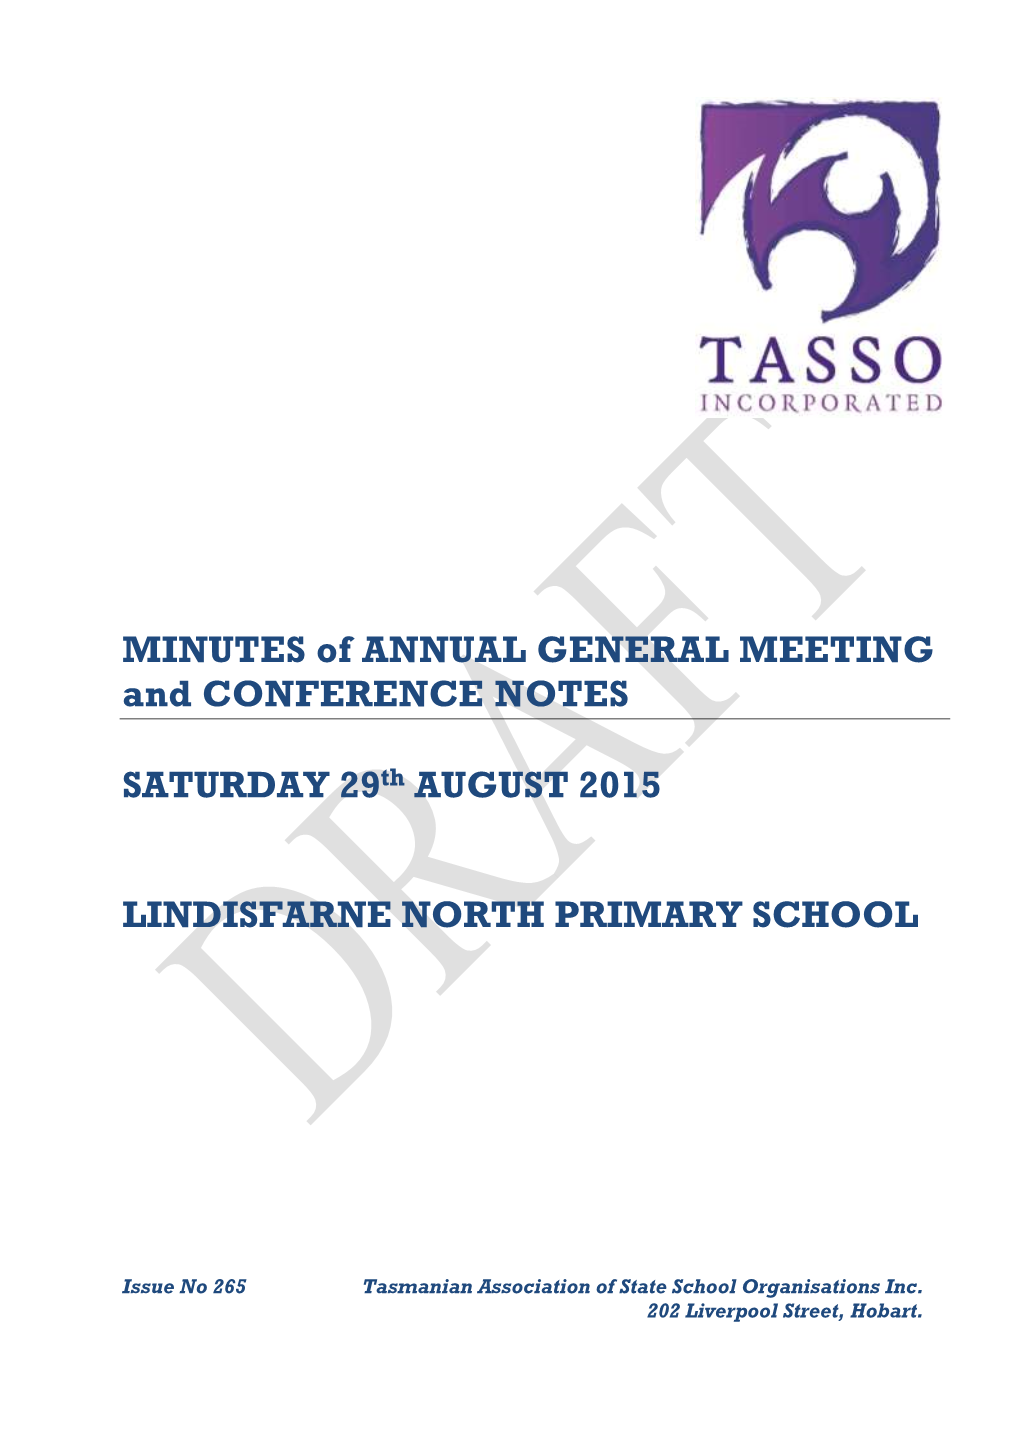 MINUTES of ANNUAL GENERAL MEETING and CONFERENCE NOTES